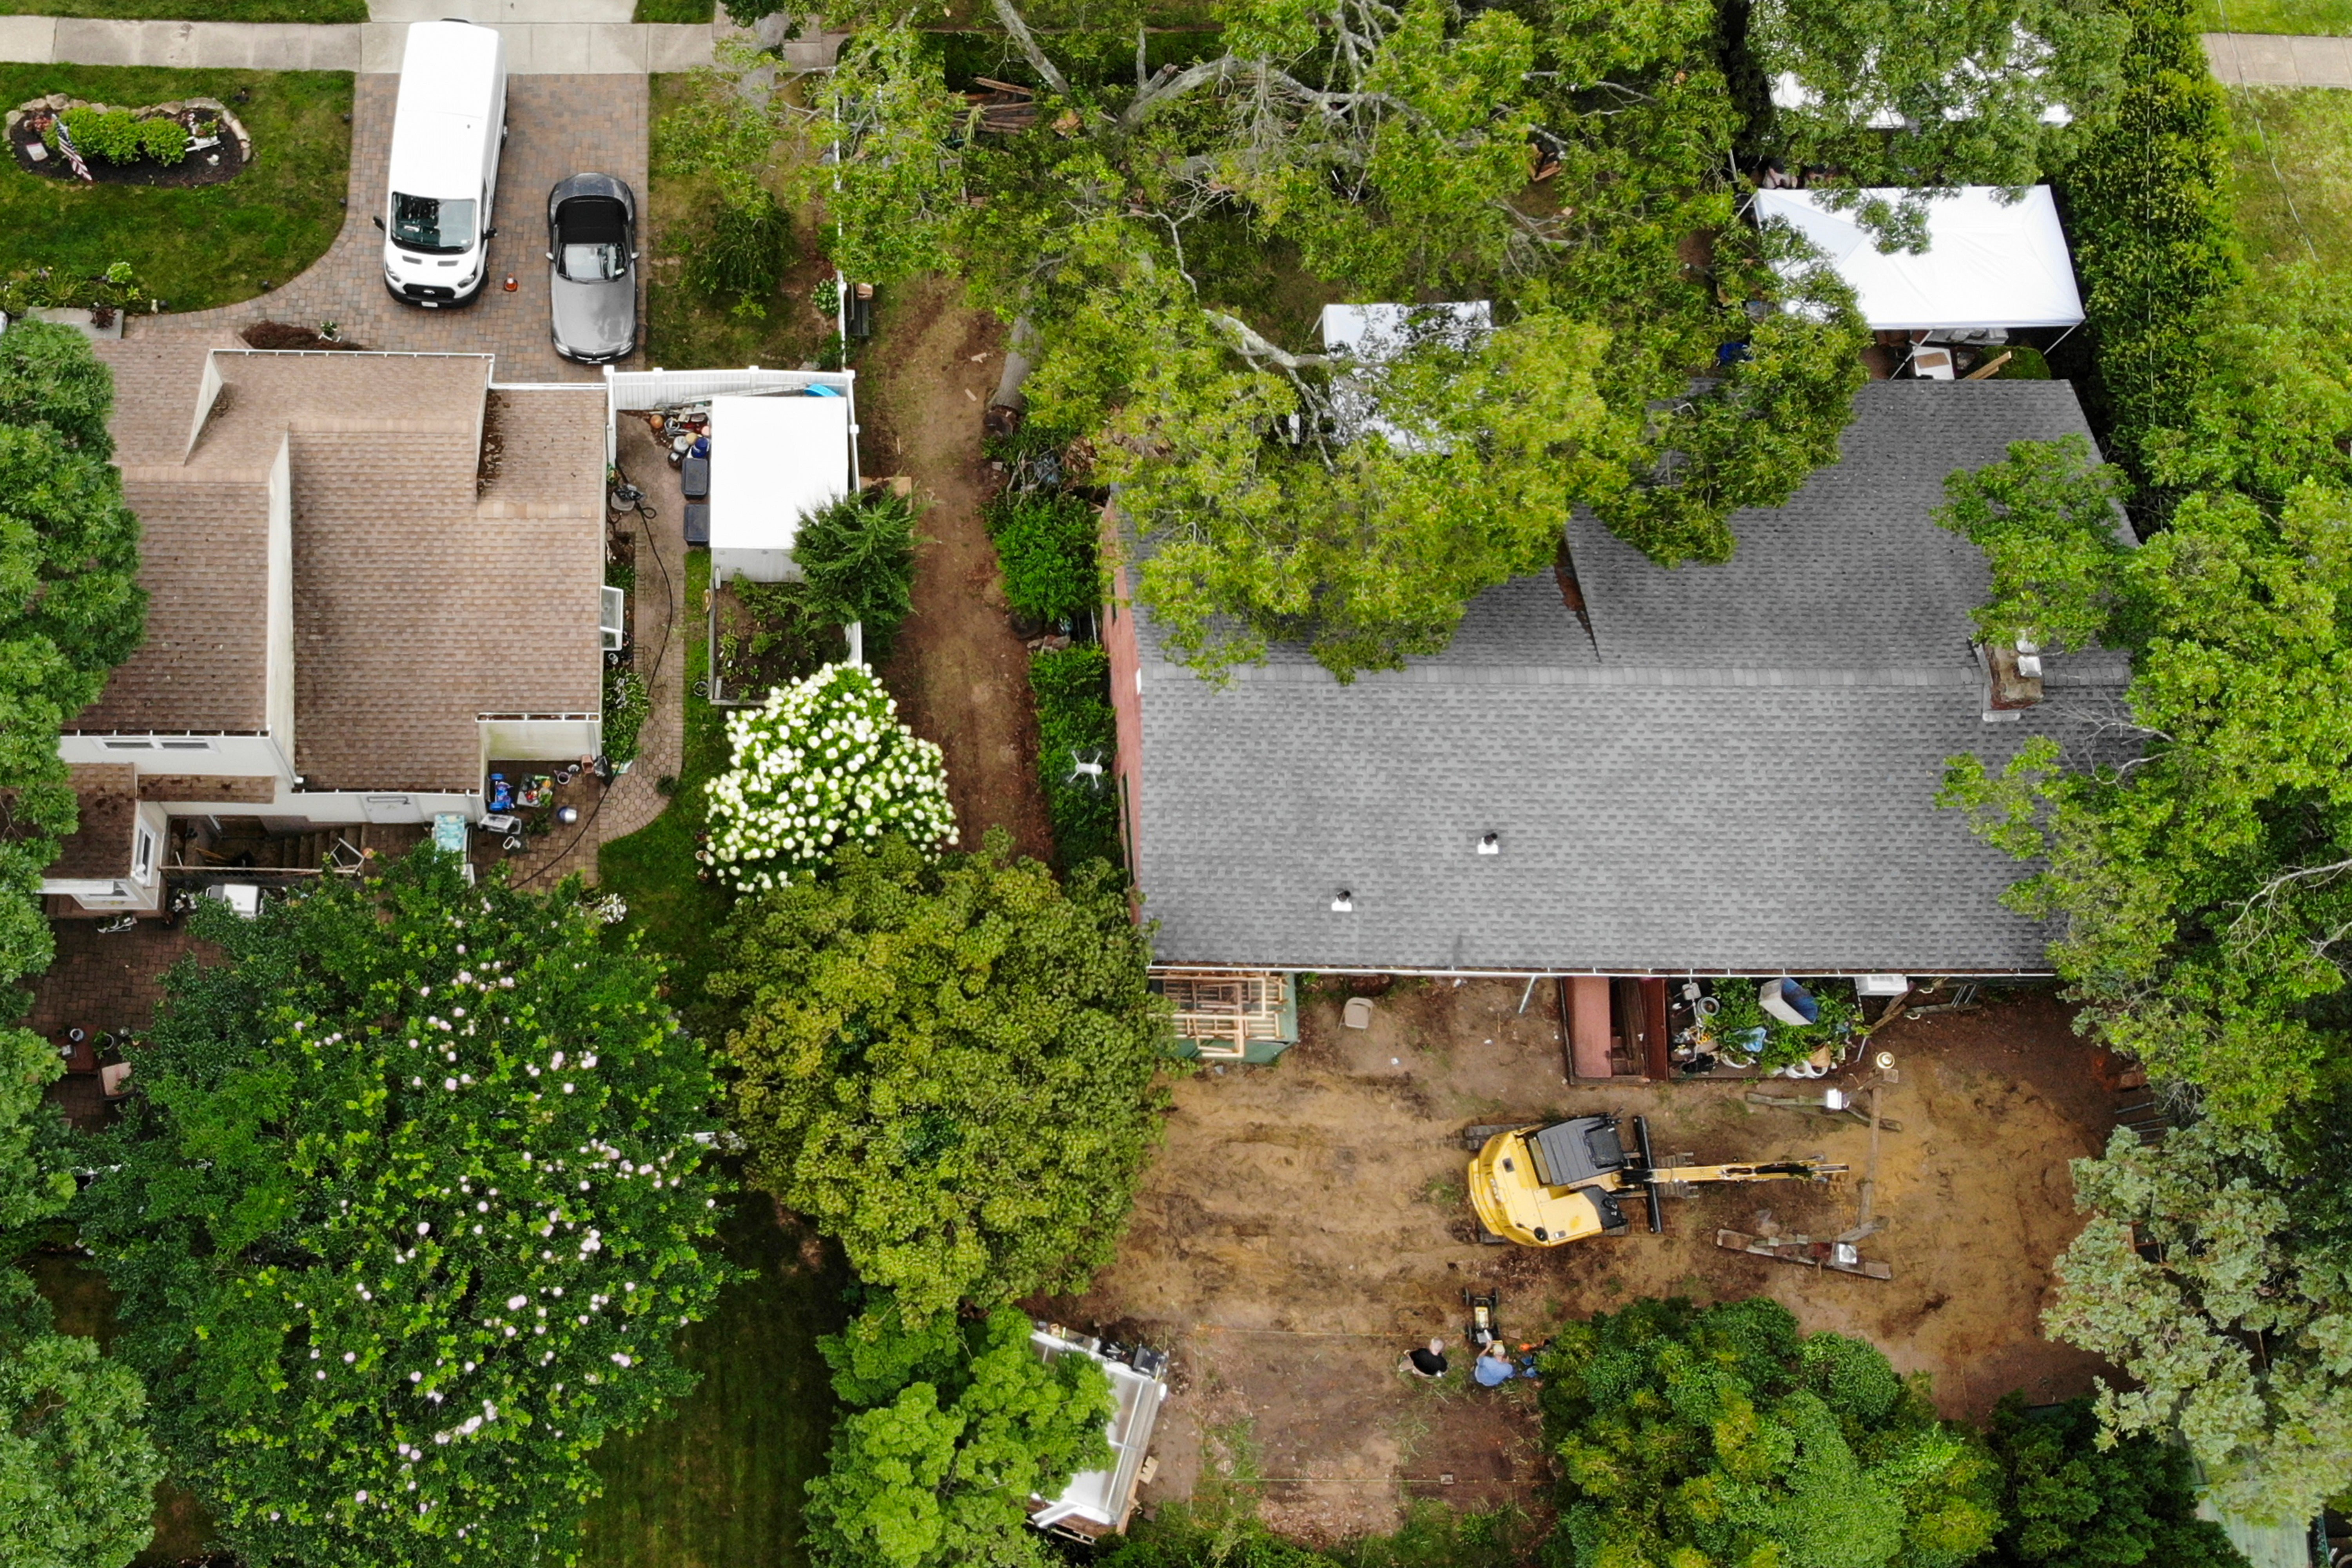 Aerial view of search on Rex Heuermann’s home